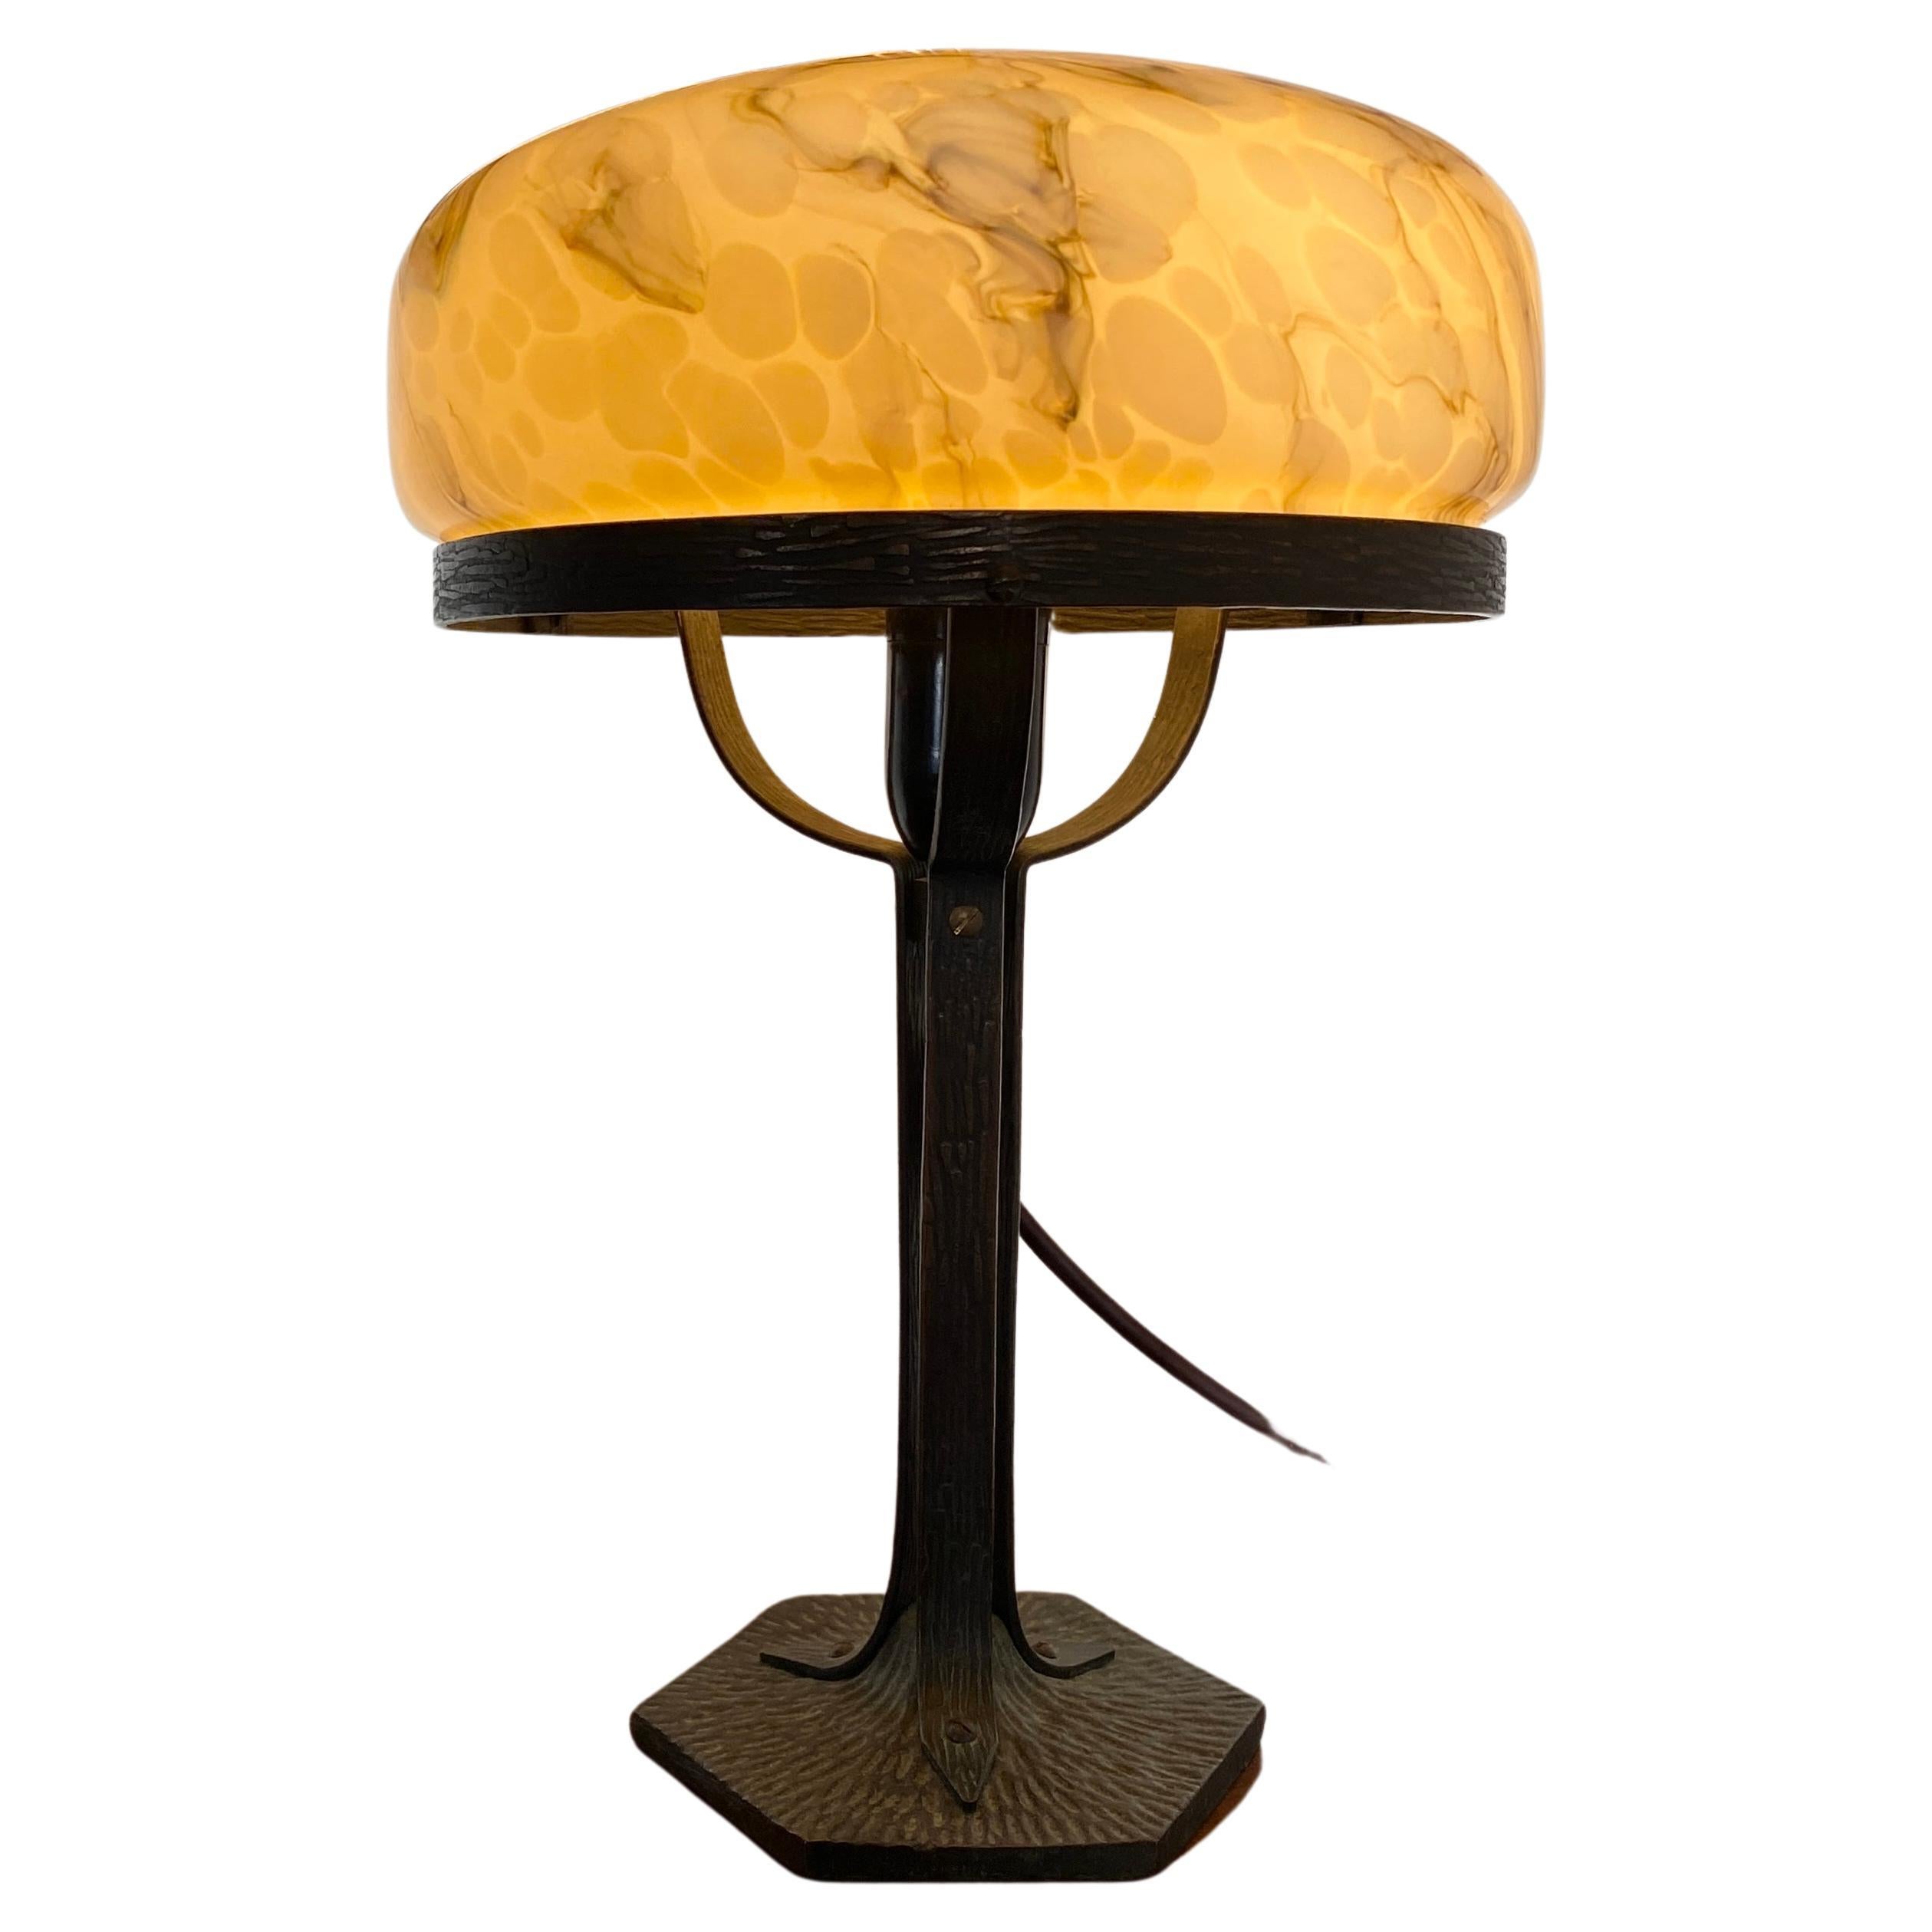 Early 20th century Strindberg Model Table Lamp in Hammered Copper Base and Frosted Art Glass Shade. 

